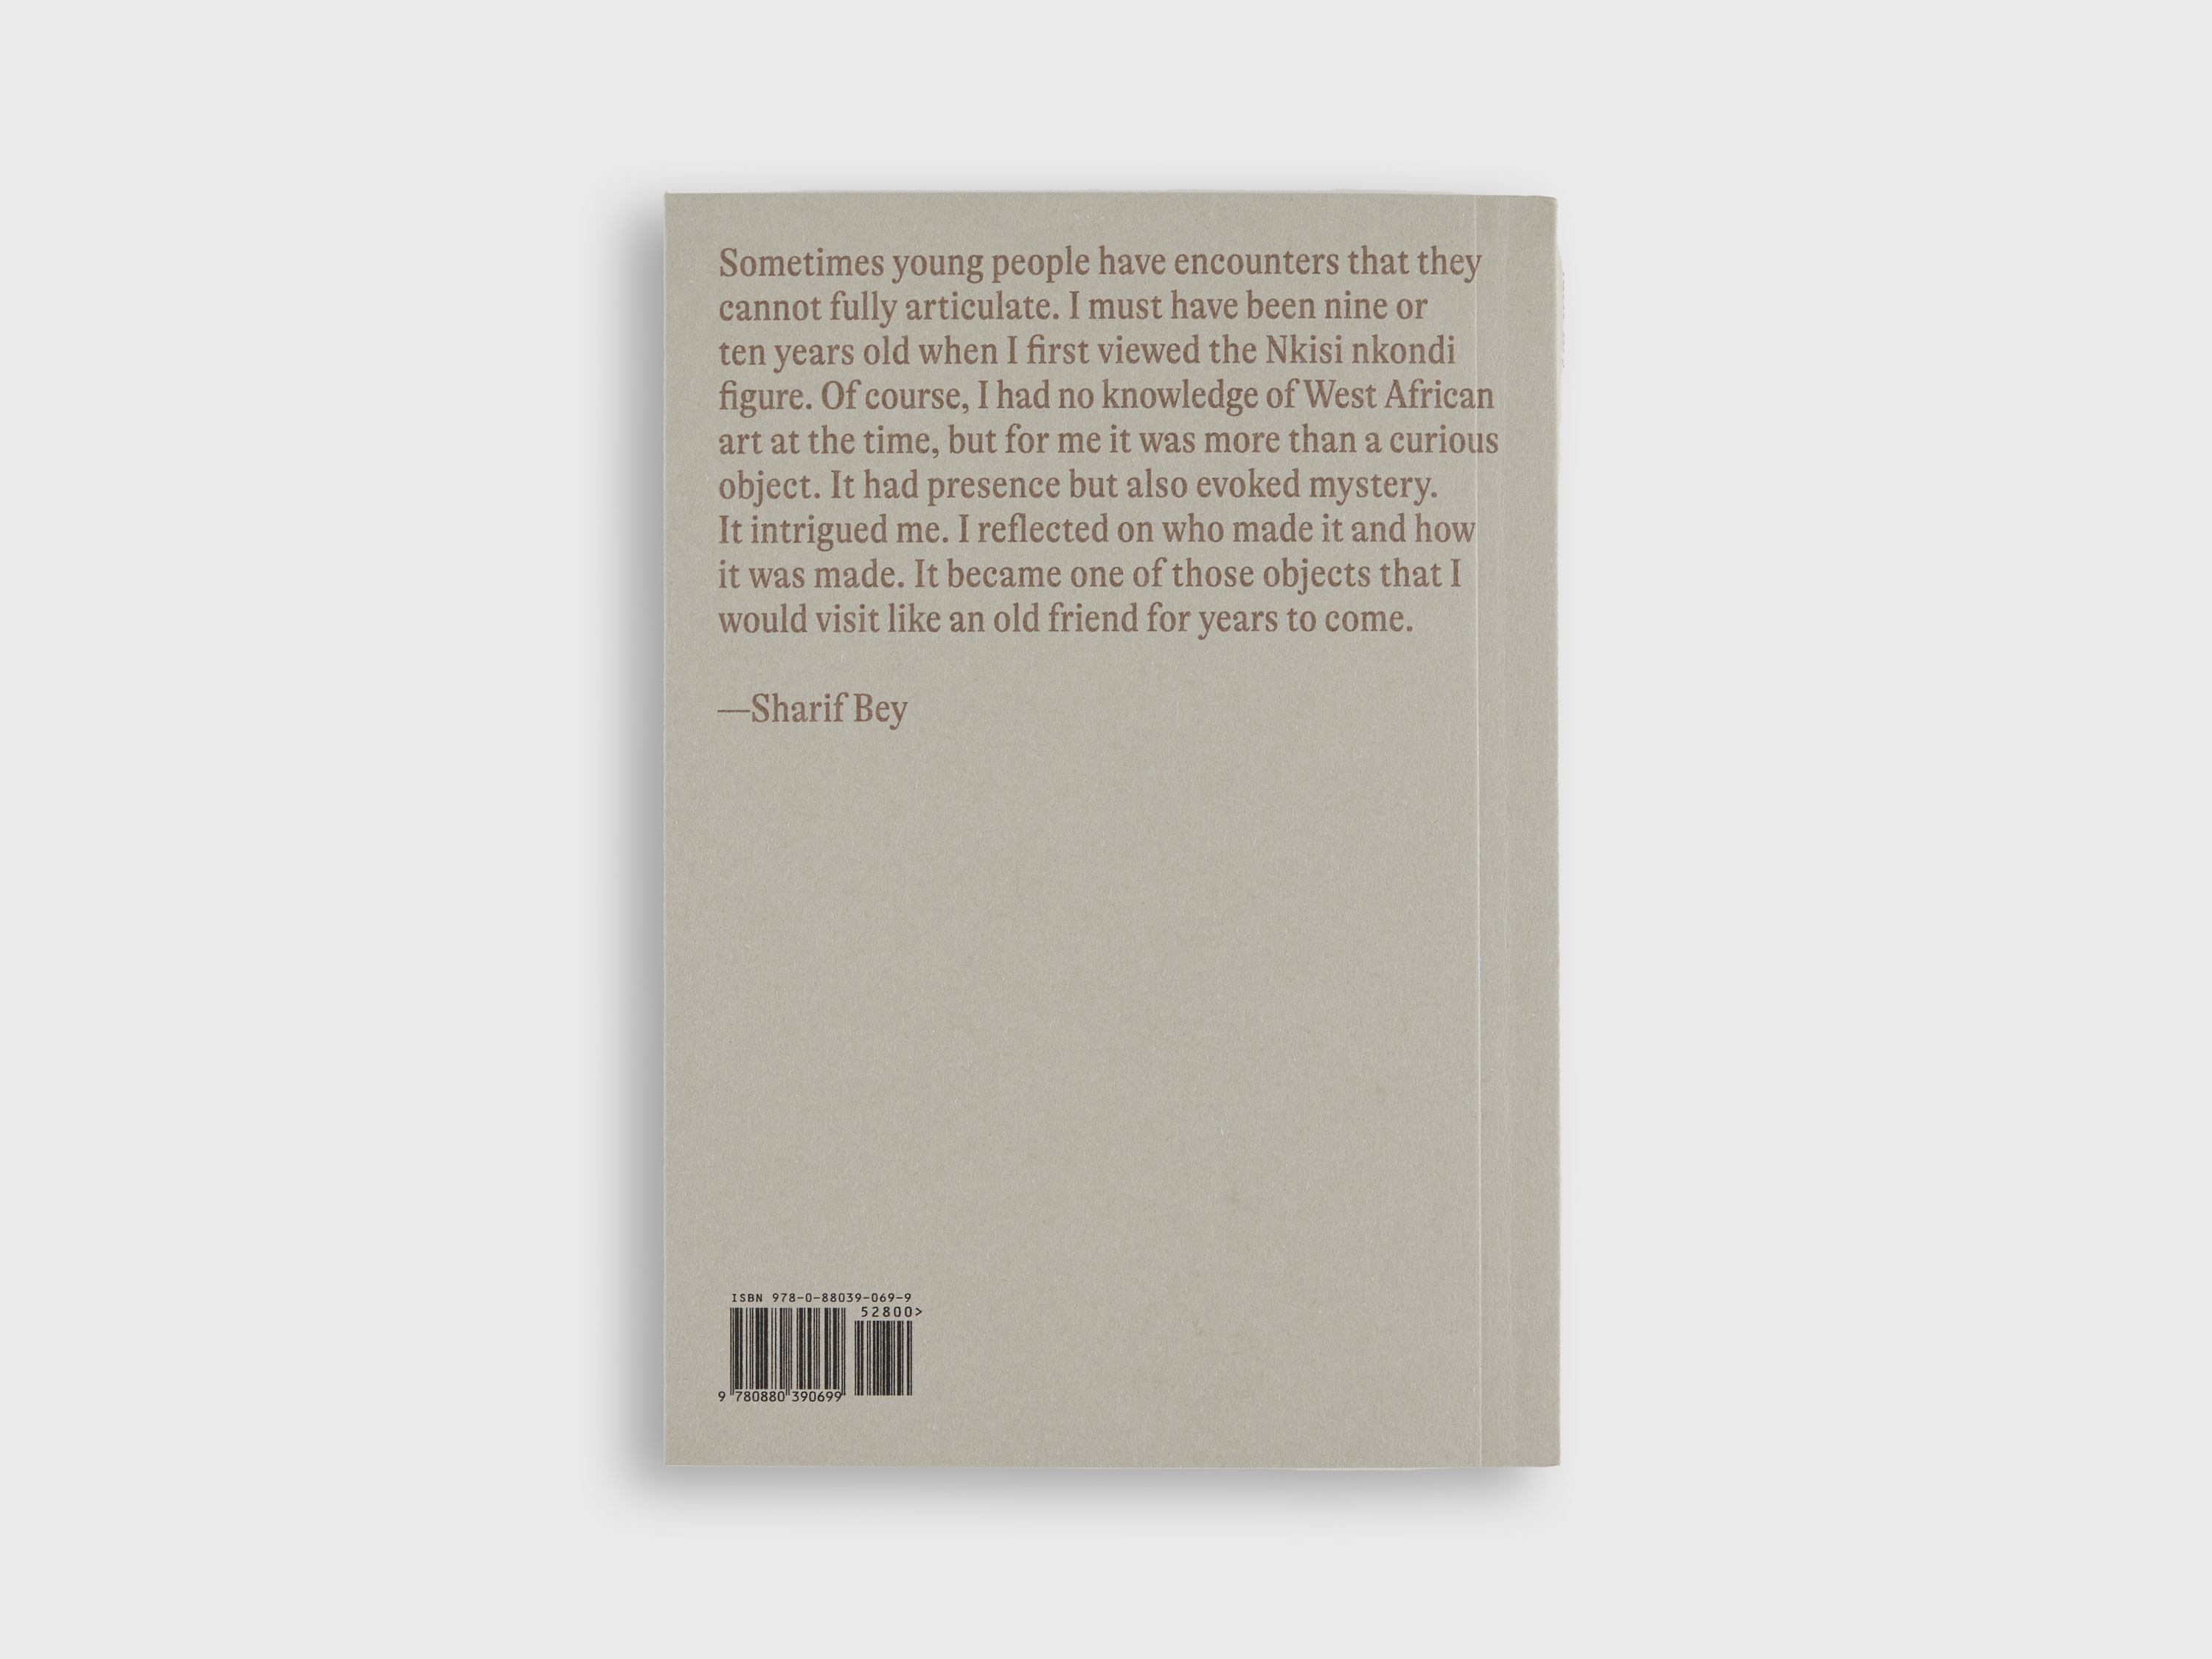 A book against a grey background